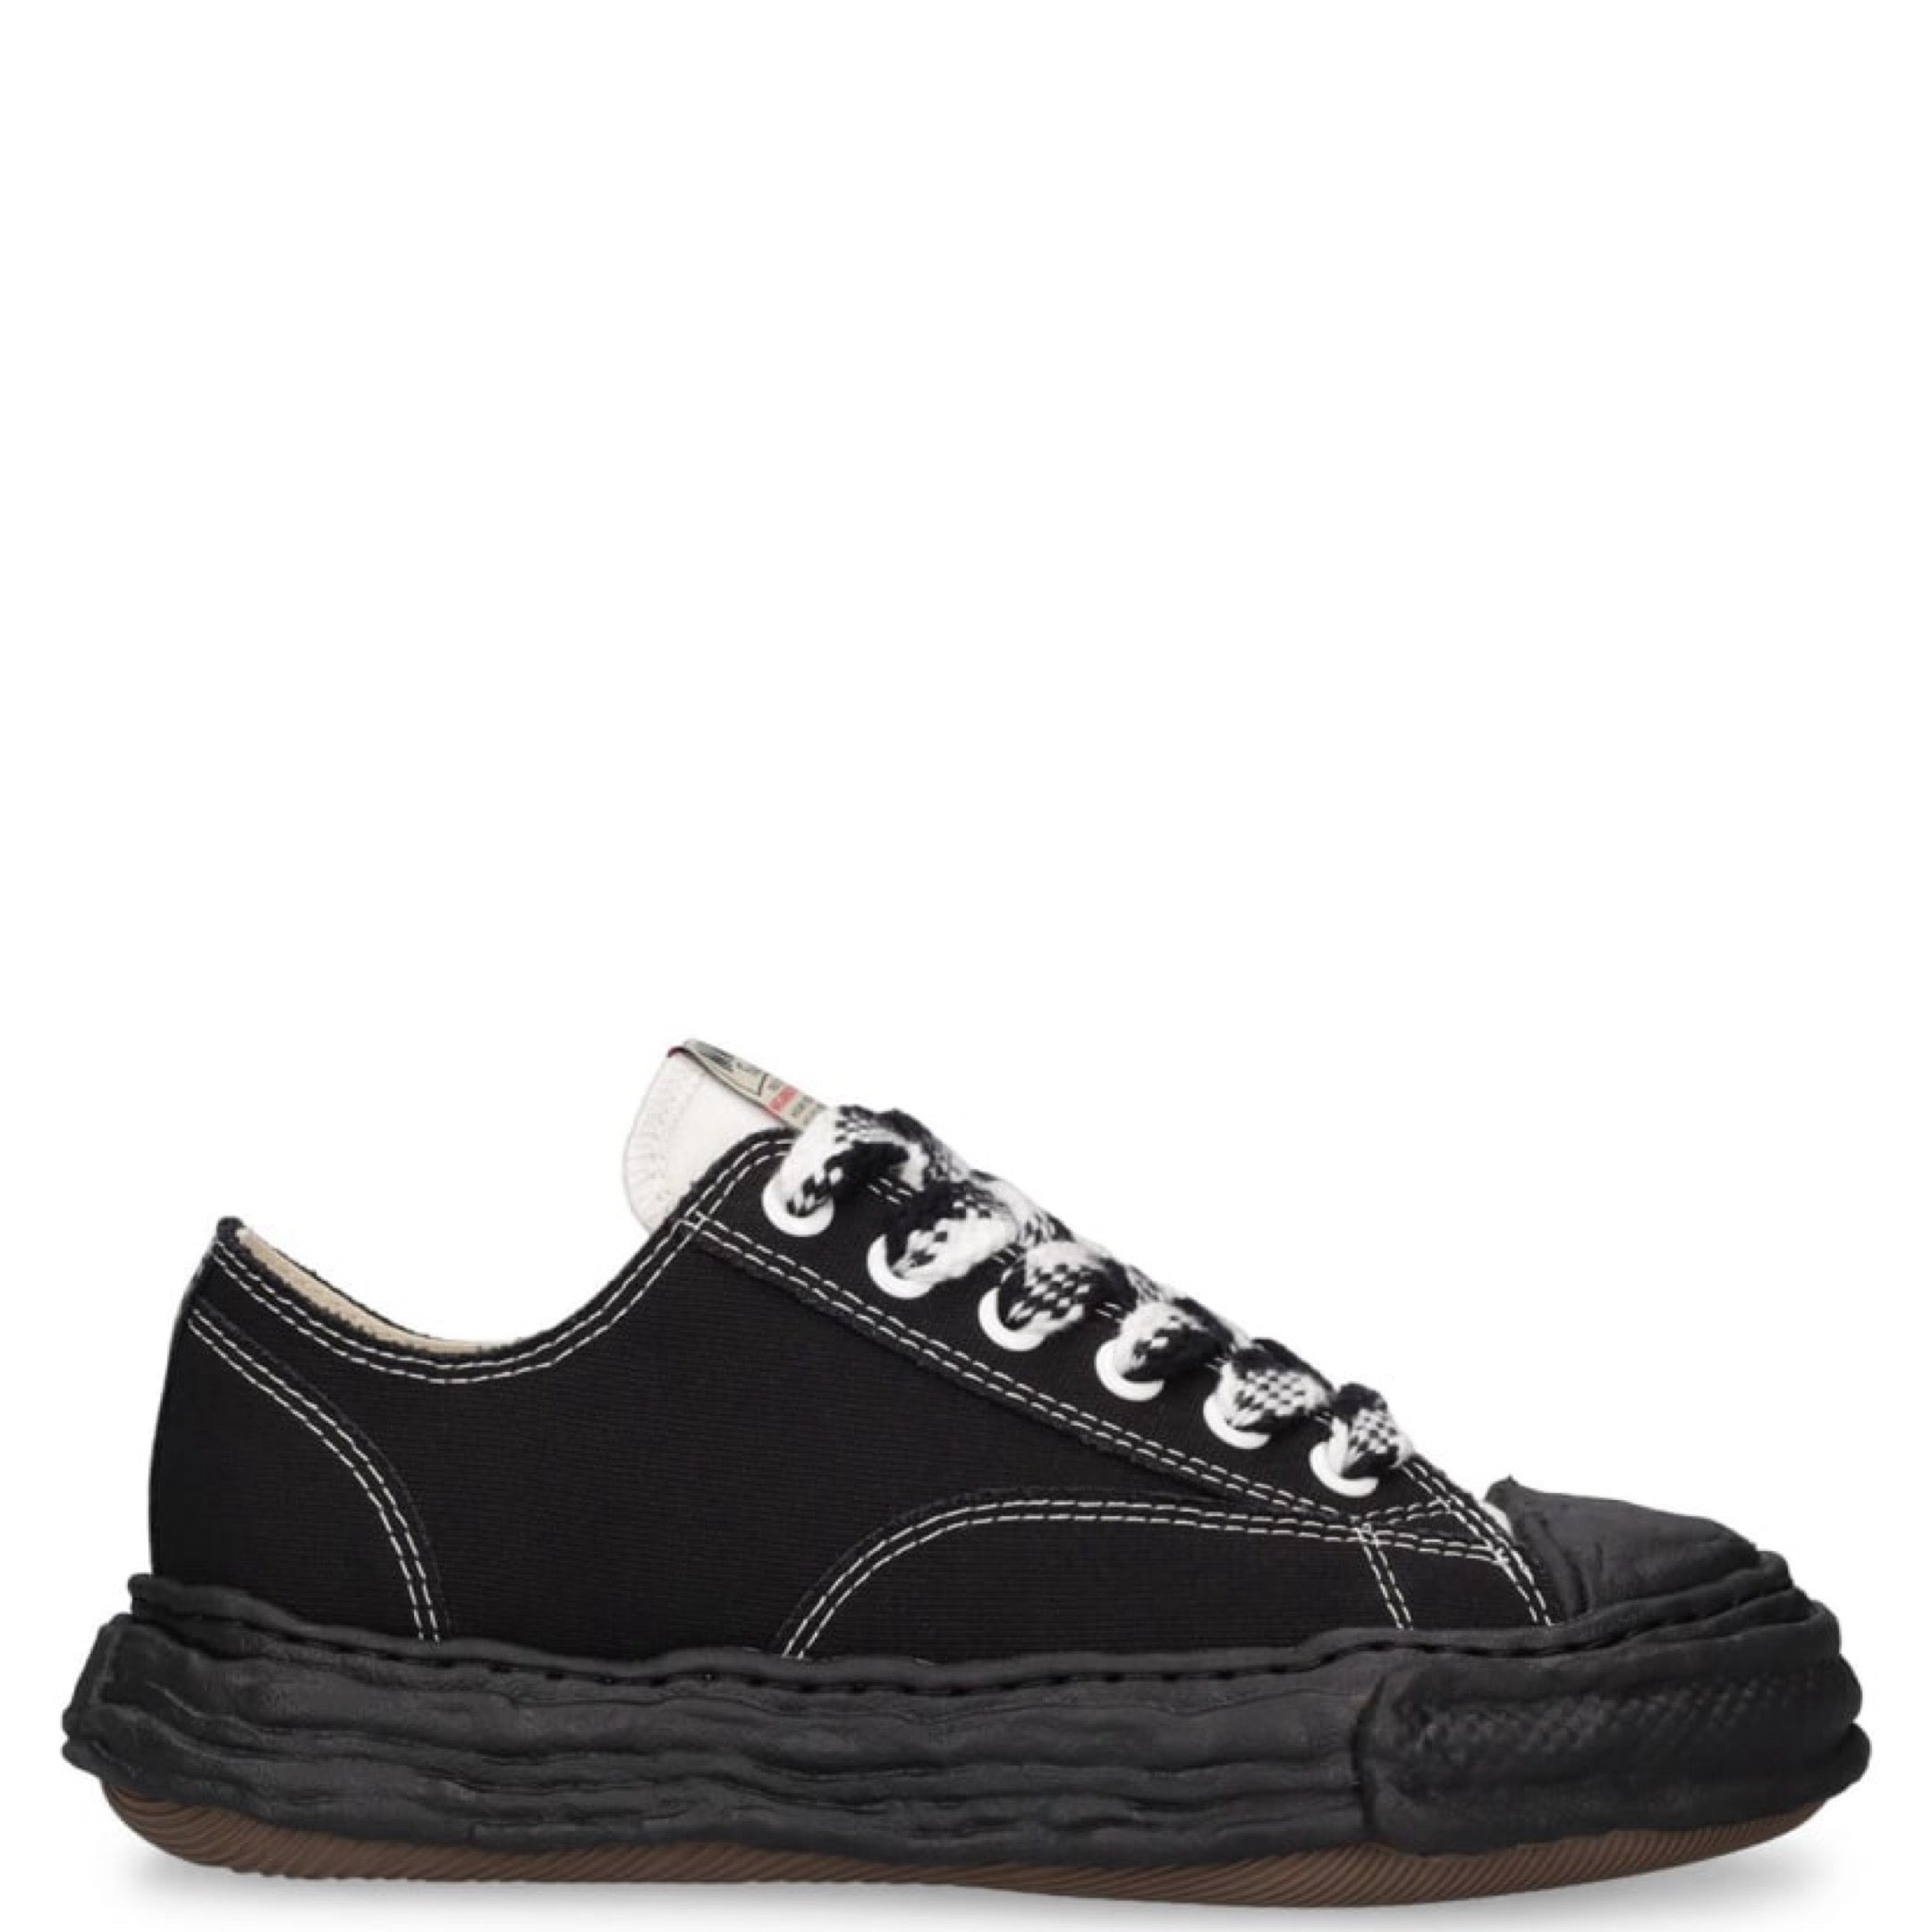 Mihara Yasuhiro Peterson23 LOW OG SOLE CANVAS BLACK SNEAKERS WHITE/BLACK LACES